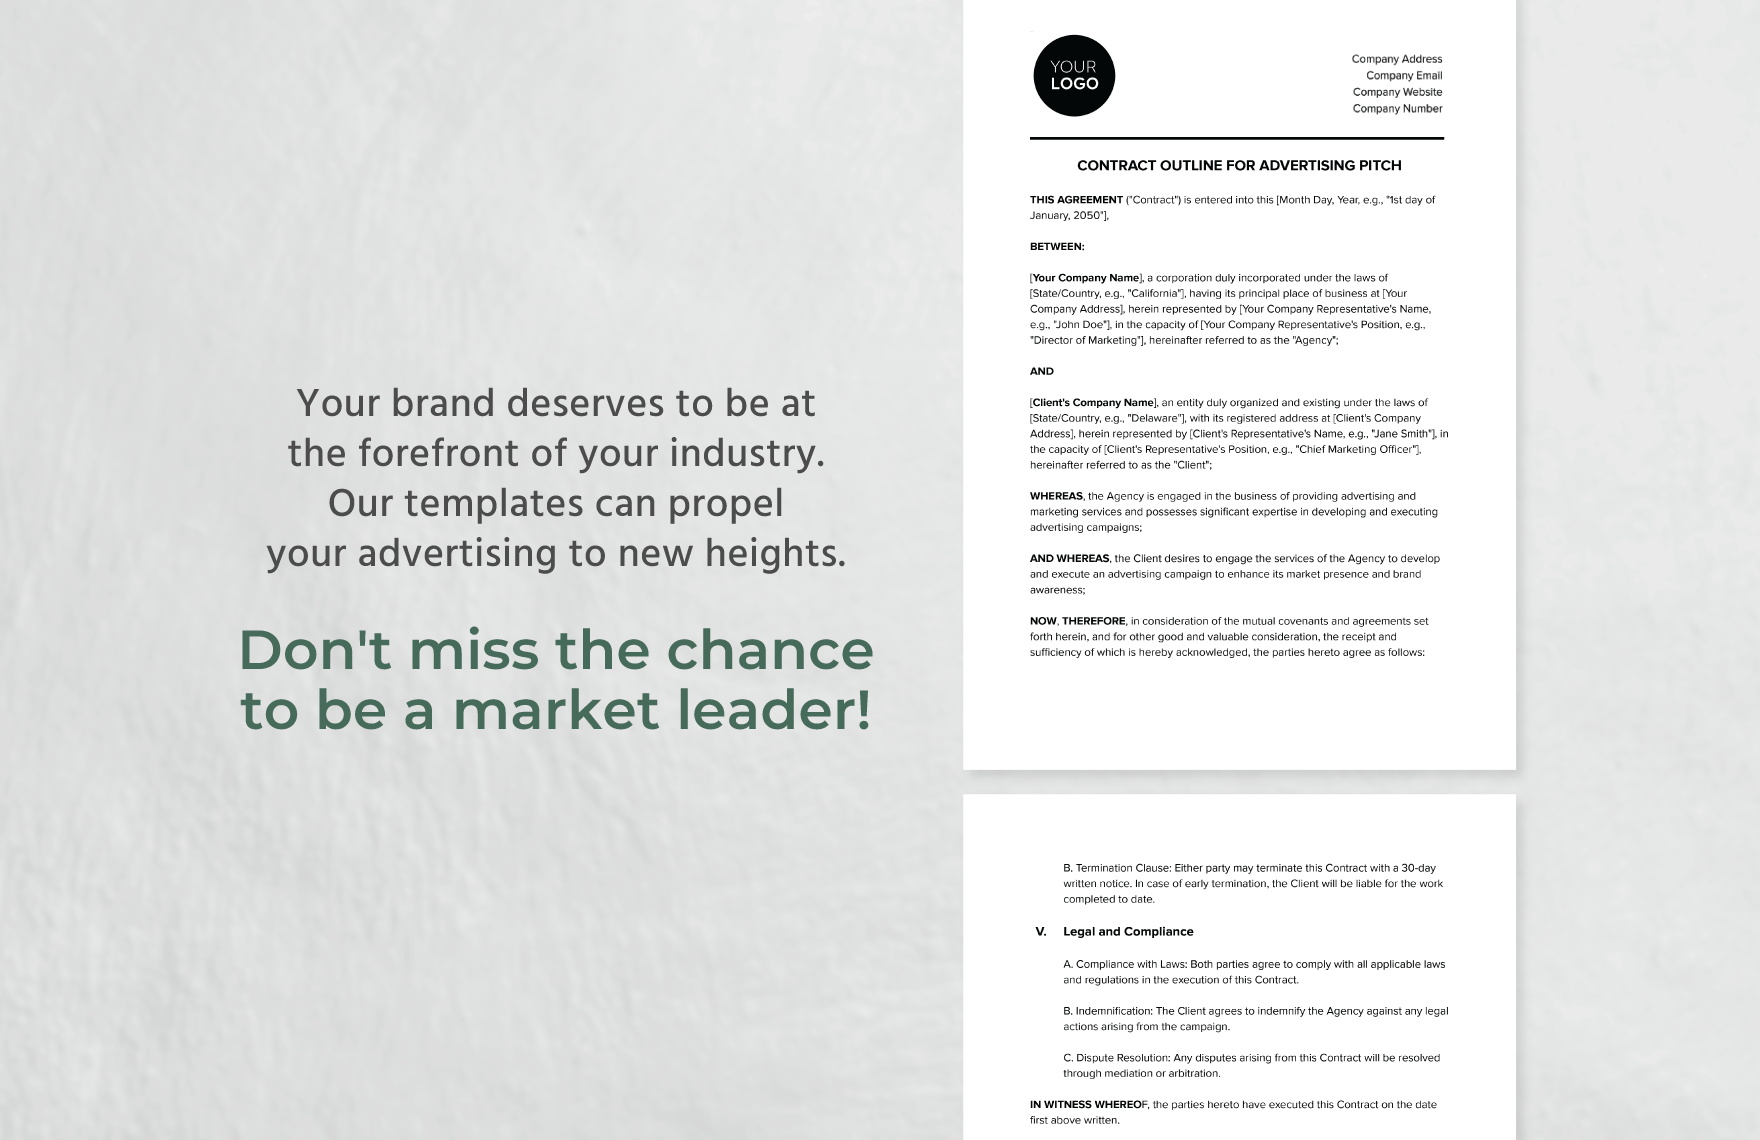 Contract Outline for Advertising Pitch Template